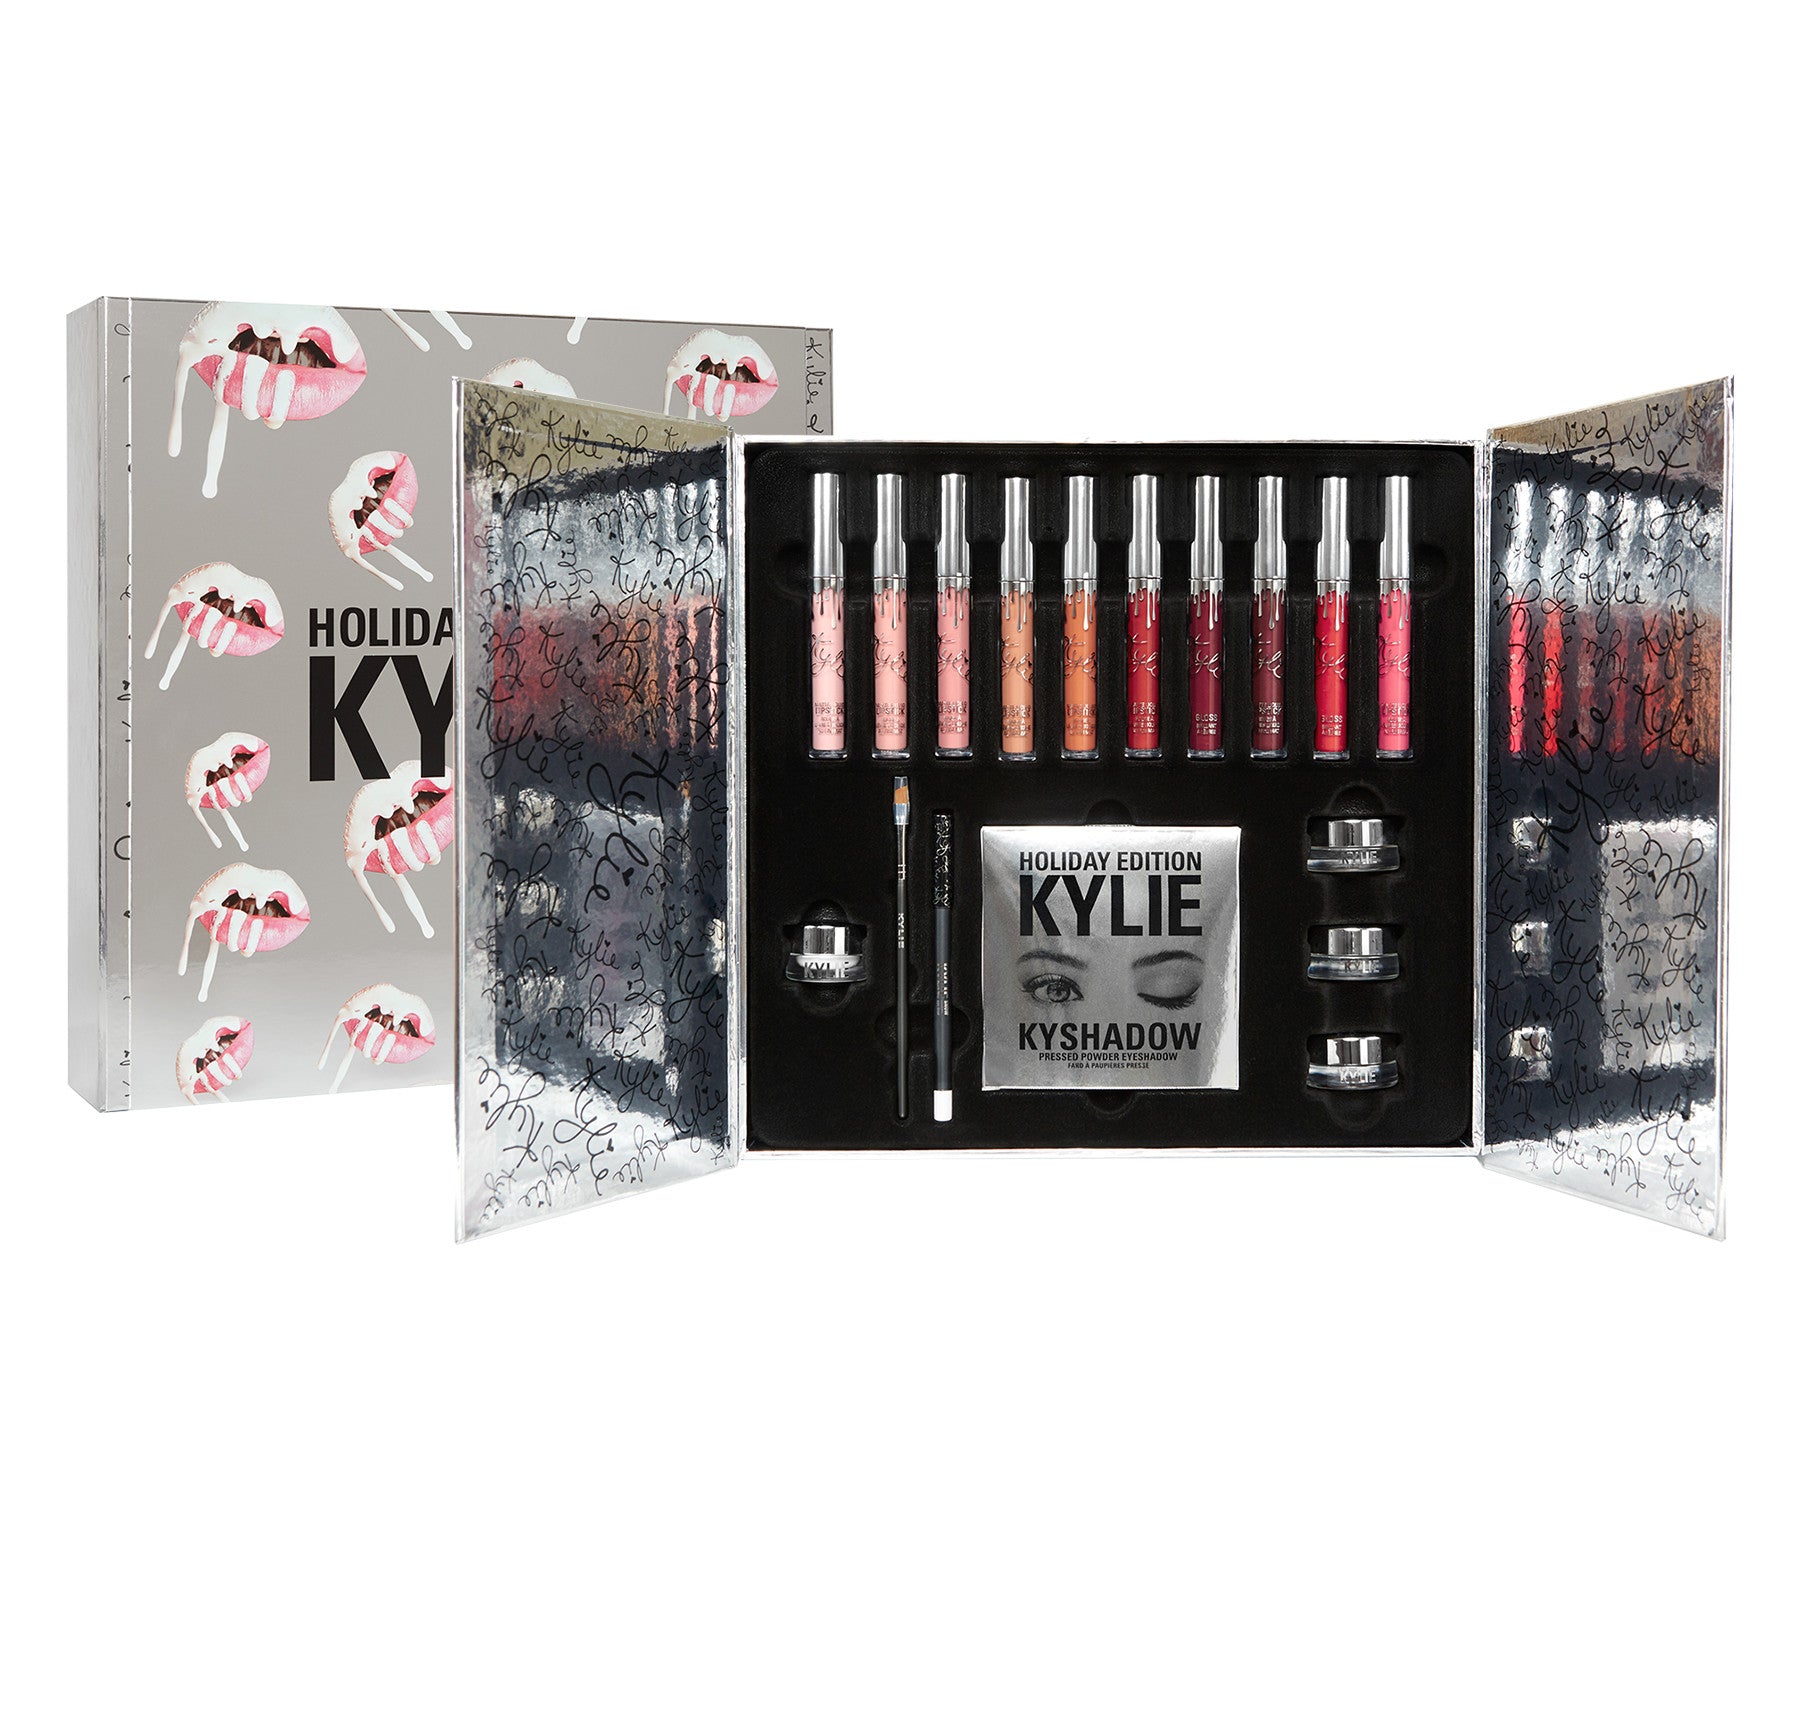 Kylie Holiday Box Limited Edition